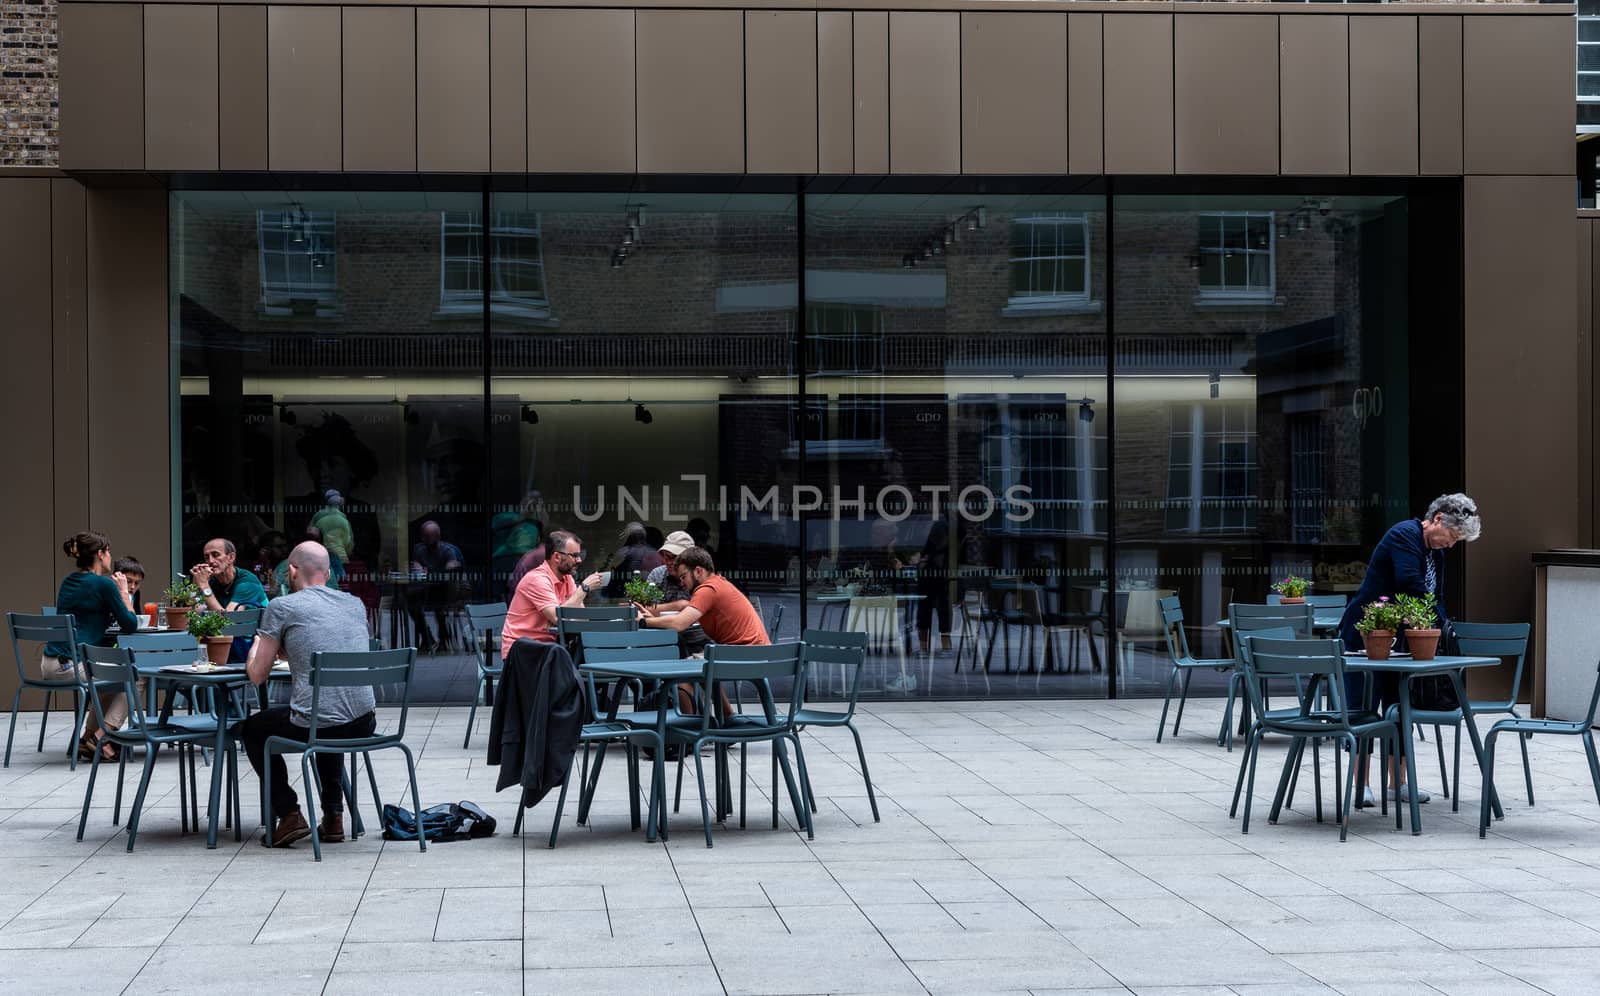 Dublin, Ireland--July 16, 2018. Patrons of the Irish Emigration Museum enjoy coffee and snacks in the museum courtyard.